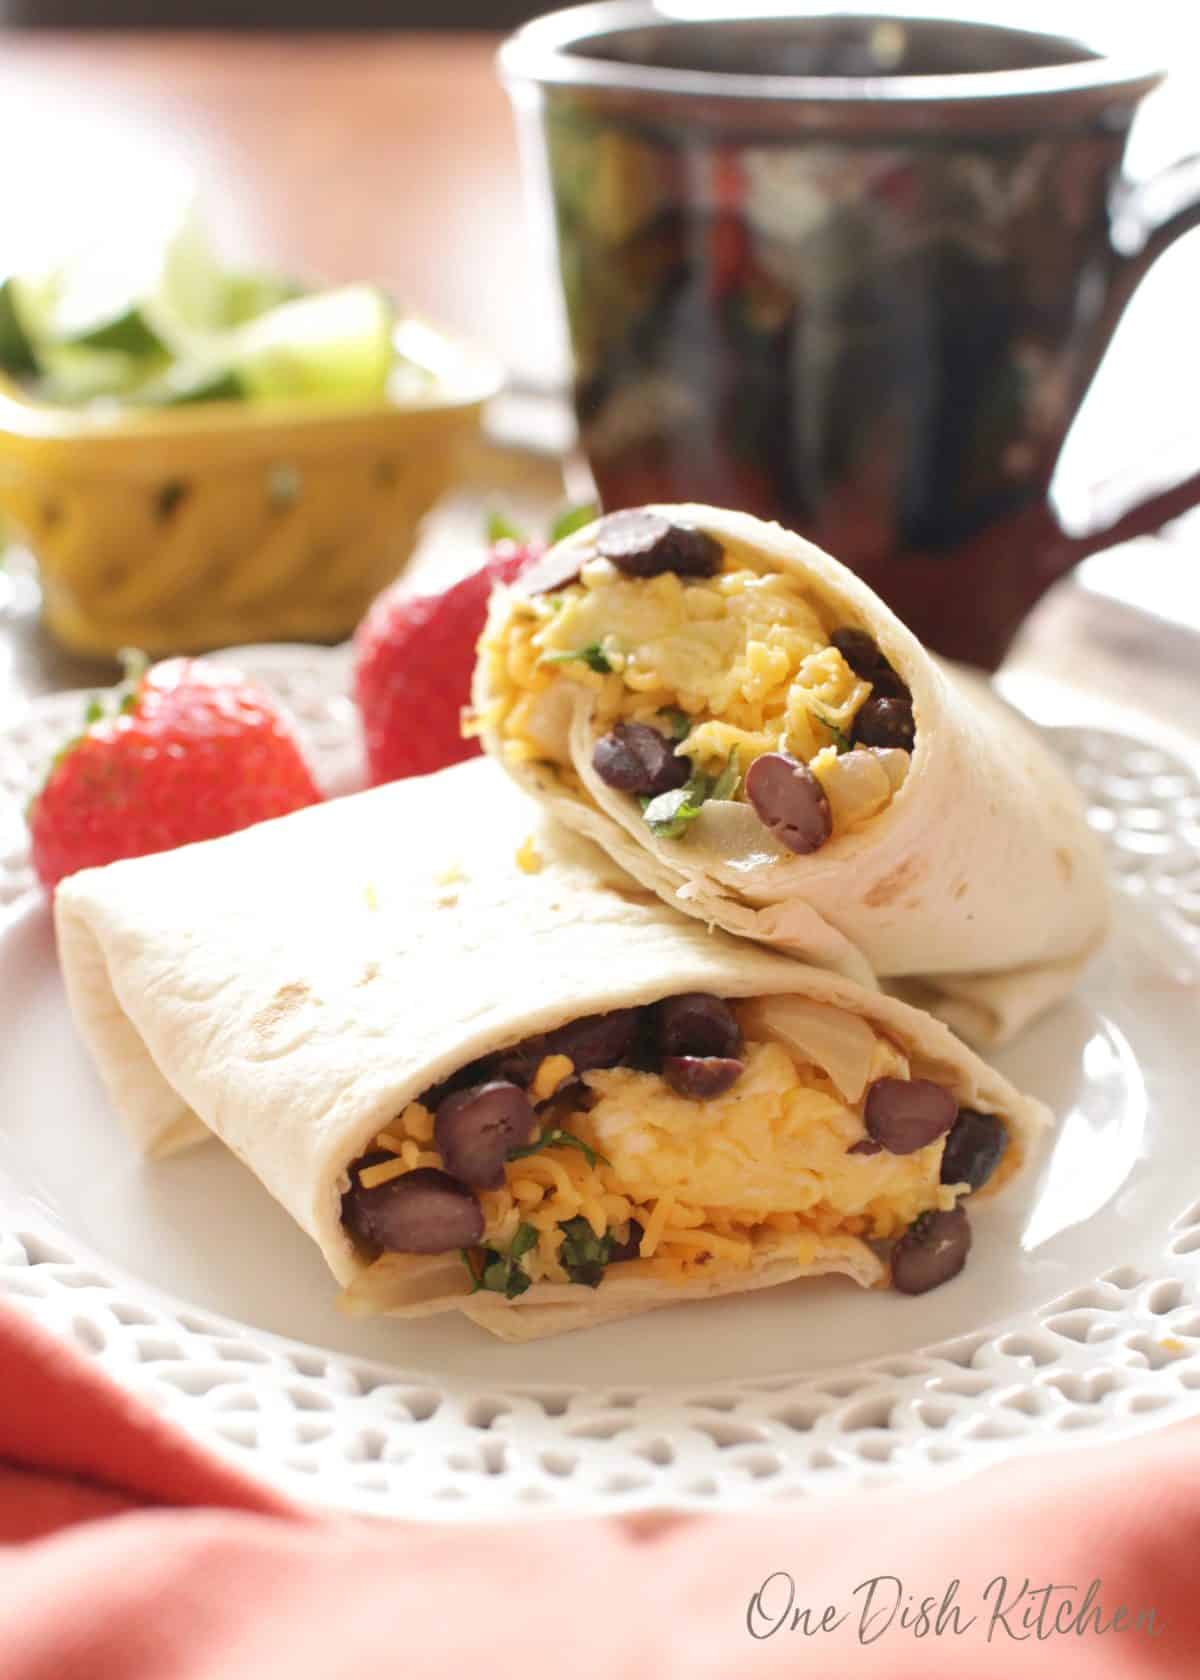 a burrito with scrambled eggs, cheese, and beans on a plate next to a cup of coffee.